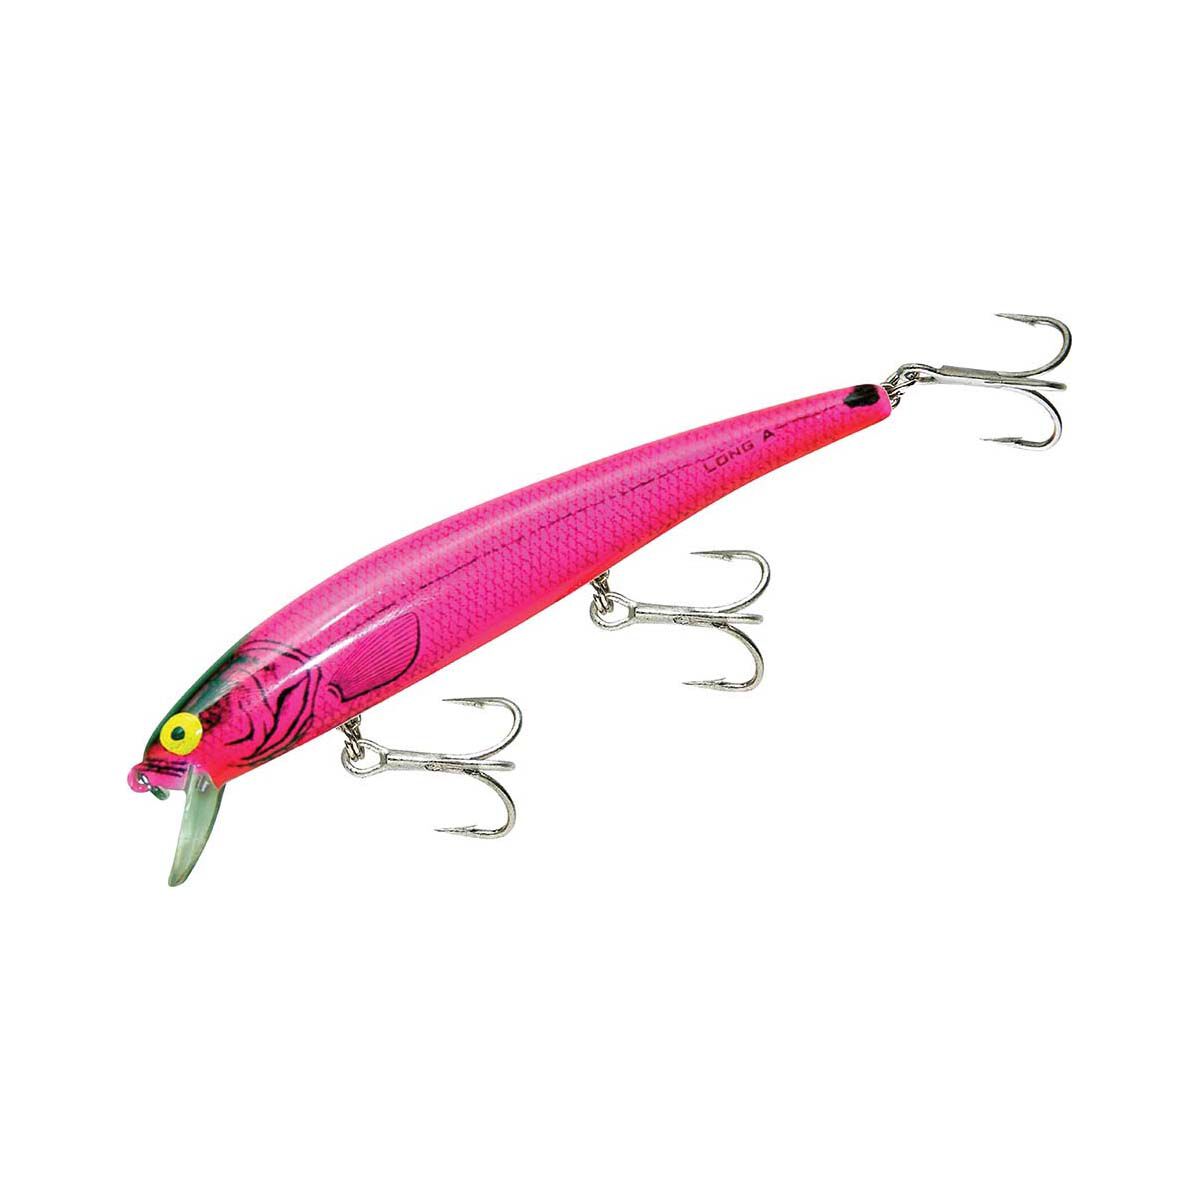 Fishing Tackle Kit, Sturdy Smooth Fishing Tackle, Fine for Marlin